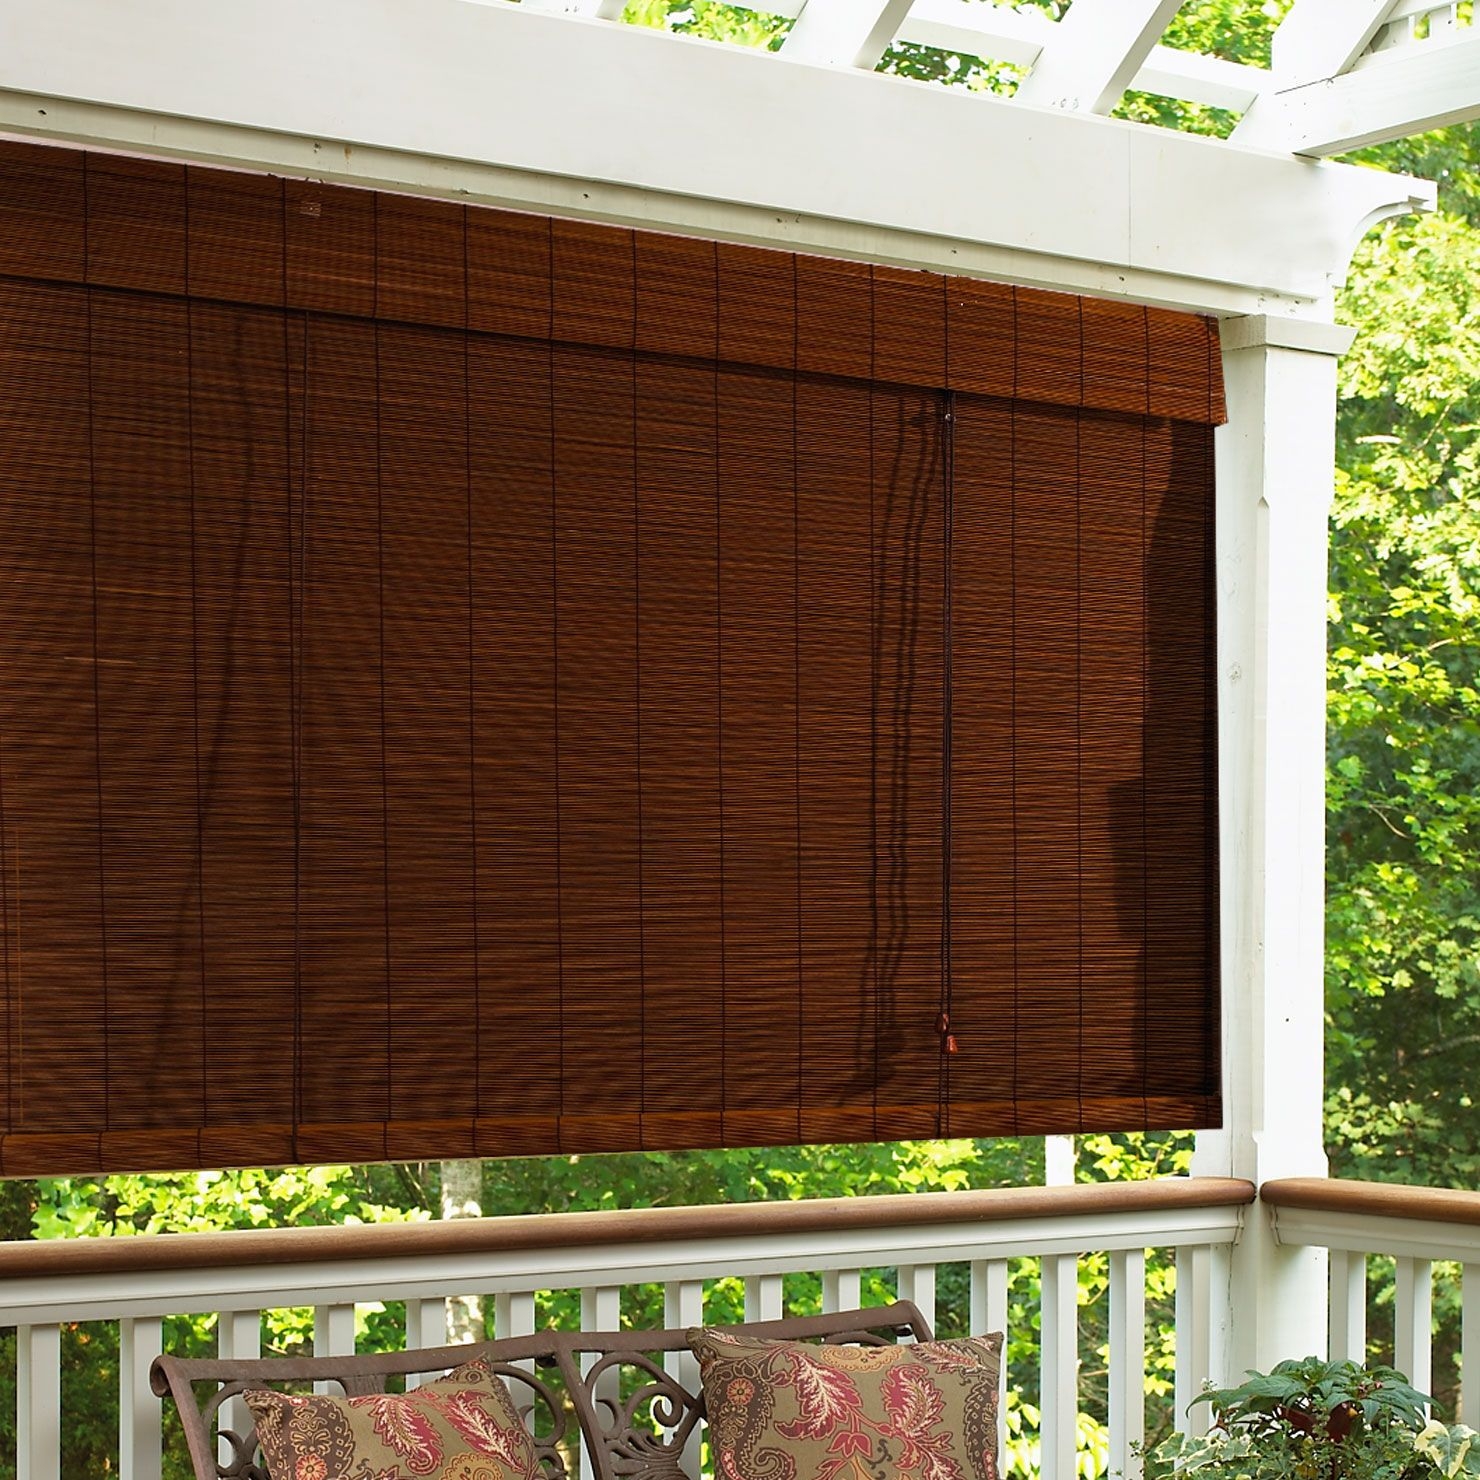 Sunscreen//Breathable Natural Curtains WYCD Bamboo Shades Roll Up Shutters Multiple Sizes Easy to Install Venetian Blinds for Outdoor//Indoor